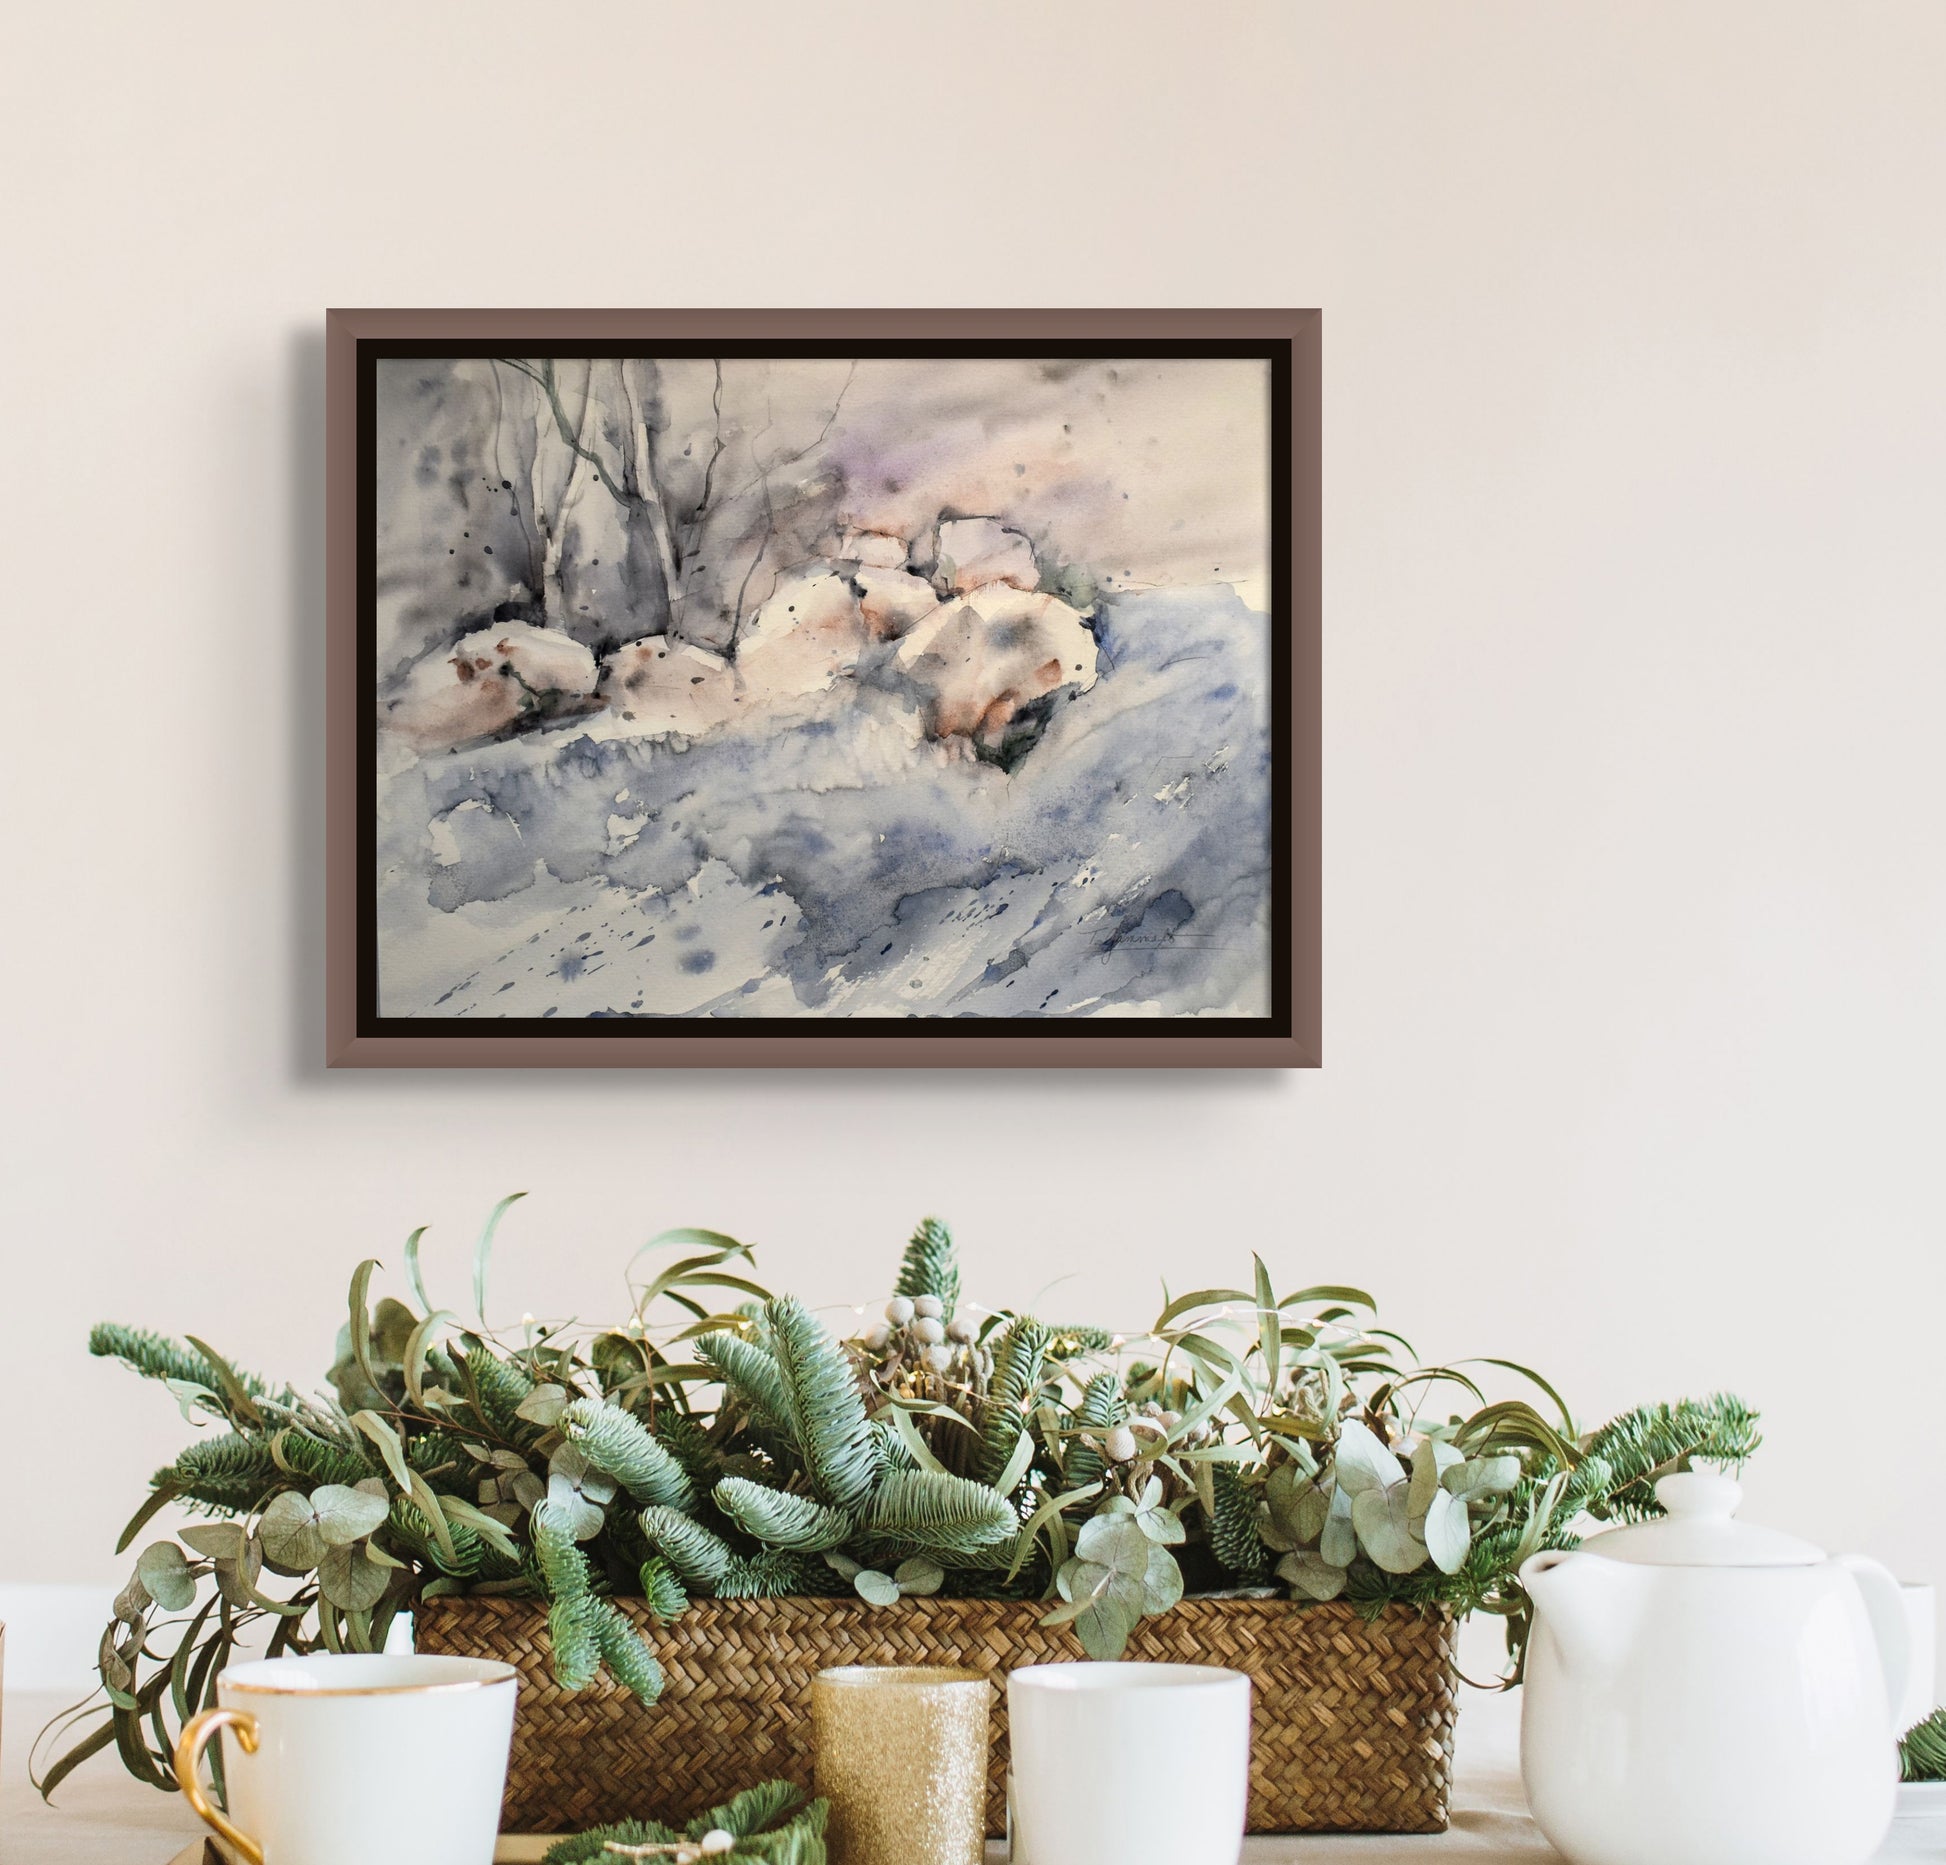 Original watercolor depicting a snow scene in nature with boulders and barren trees. Hues of grey, white and tans, shown in situ; artist Teri Gammalo; 15"Wx11"H